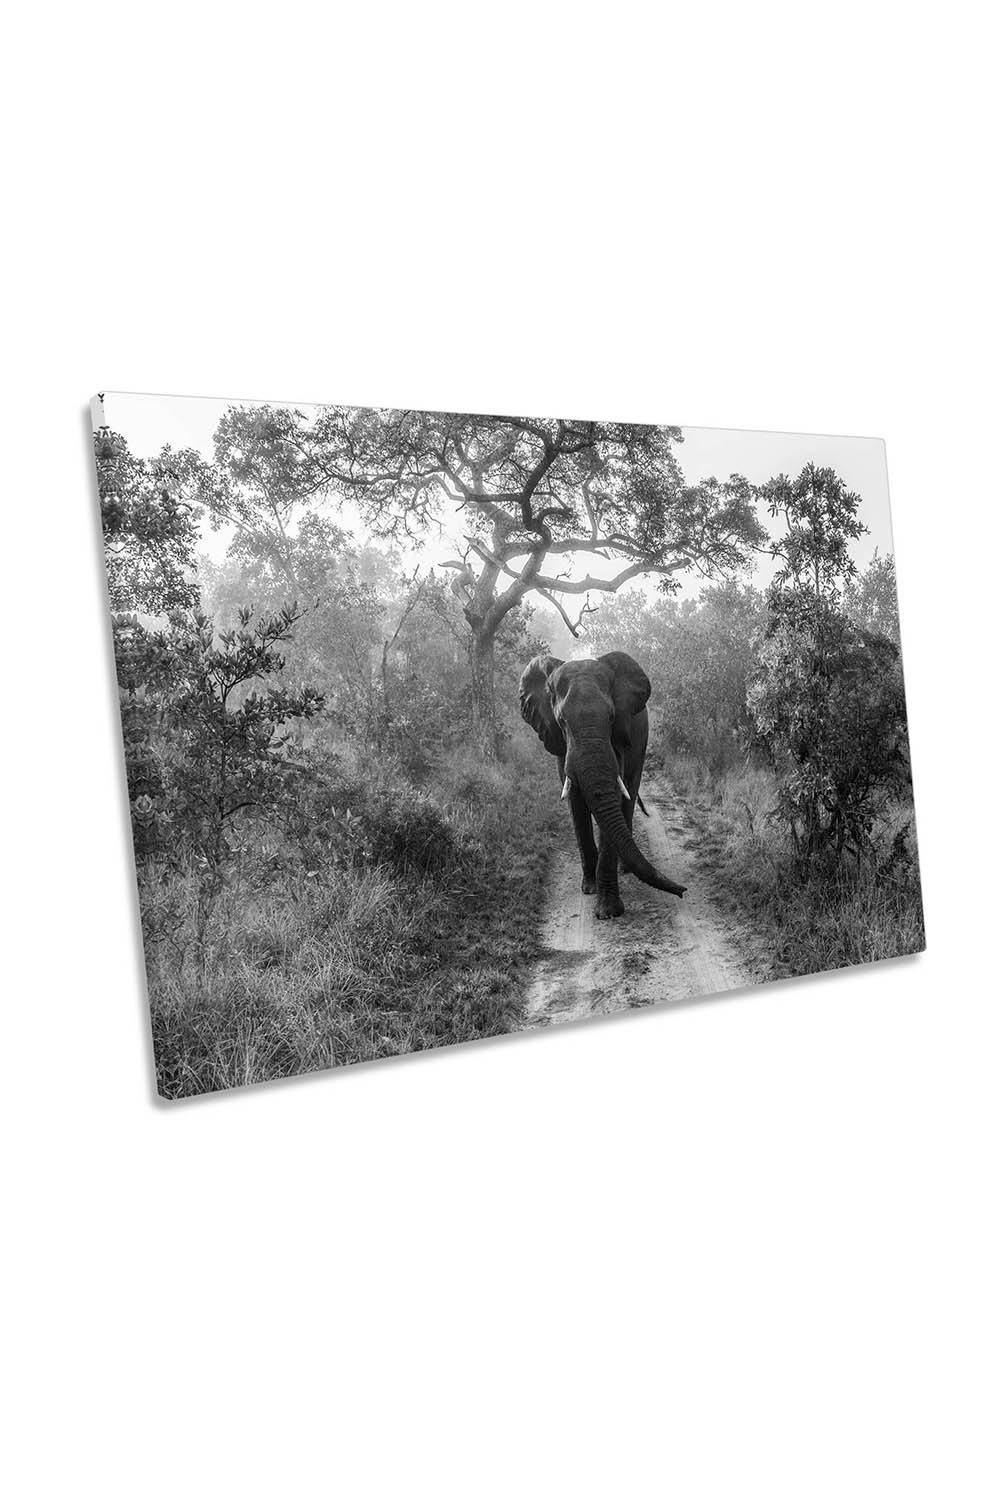 Walking Giant Elephant Canvas Wall Art Picture Print